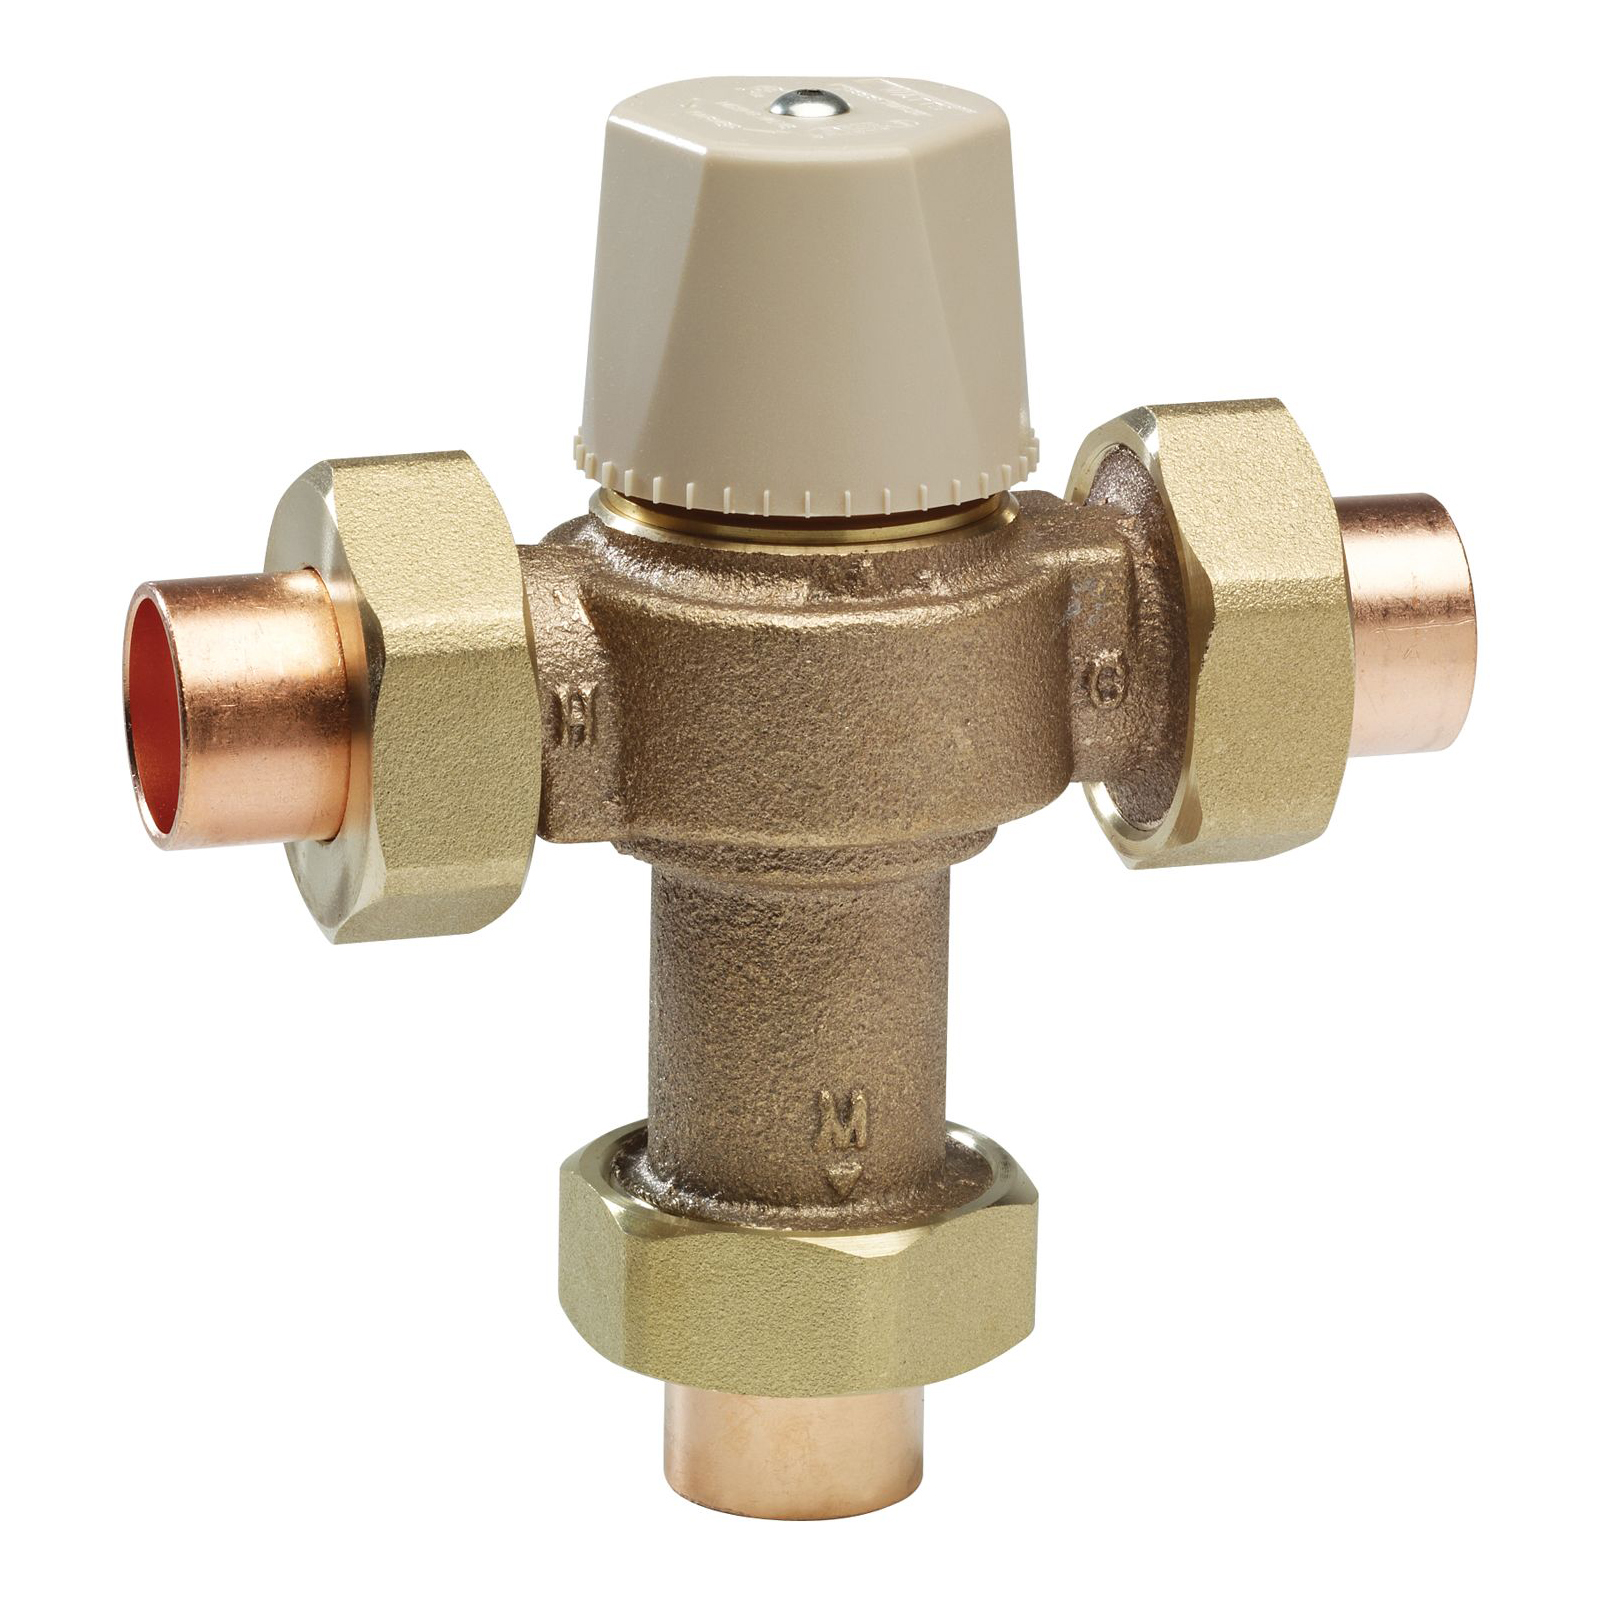 WATTS® 0559115 LFMMVM1-US Thermostatic Mixing Valve, 1/2 in Nominal, Solder End Style, 150 psi Pressure, 0.5 to 20 gpm Flow, Copper Silicon Alloy Body, Domestic